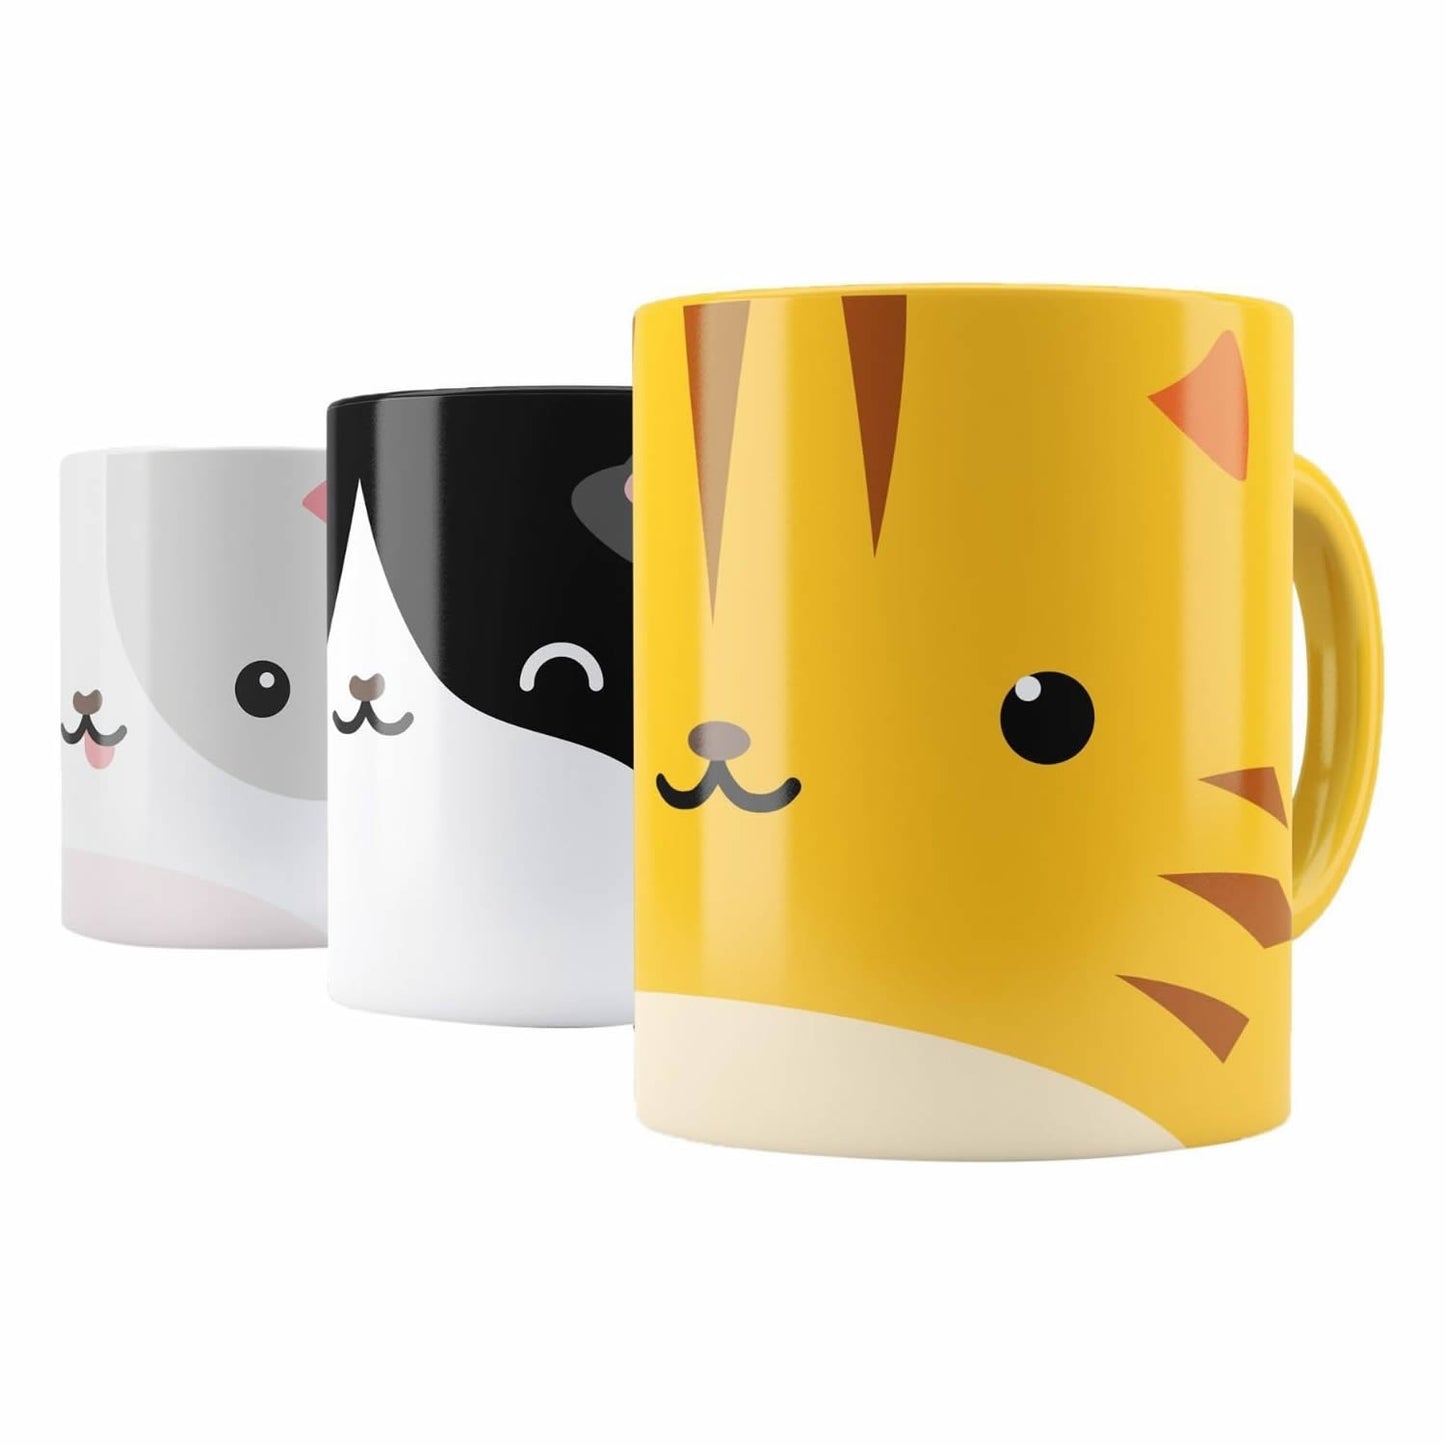 Decalize Your Mug Transfer Stickers - Cats